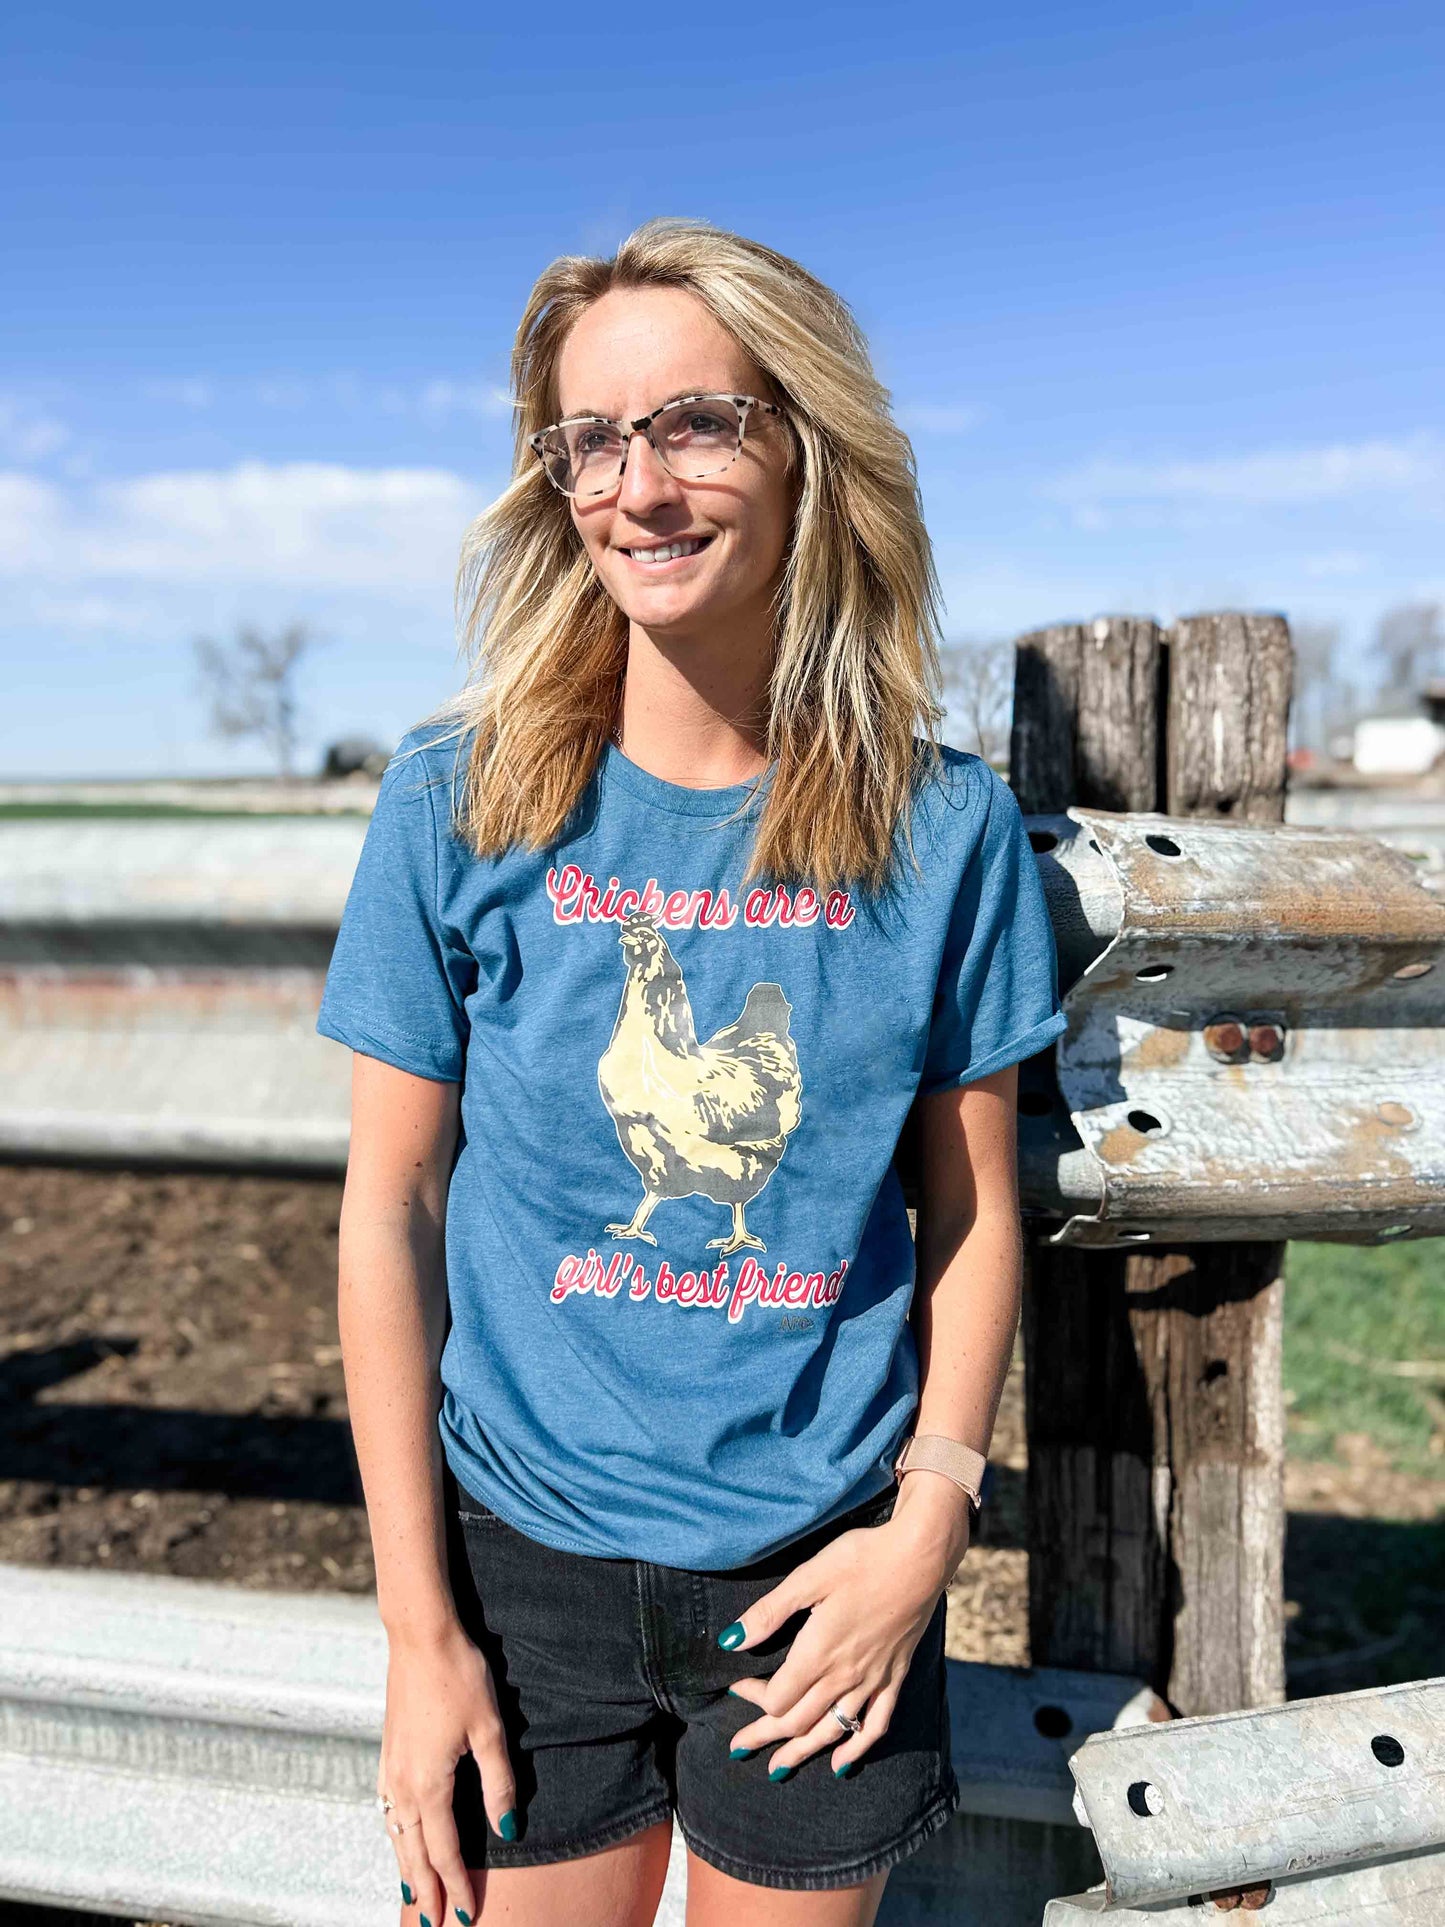 ‘Chickens are a Girl’s Best Friend’ Blue Tee